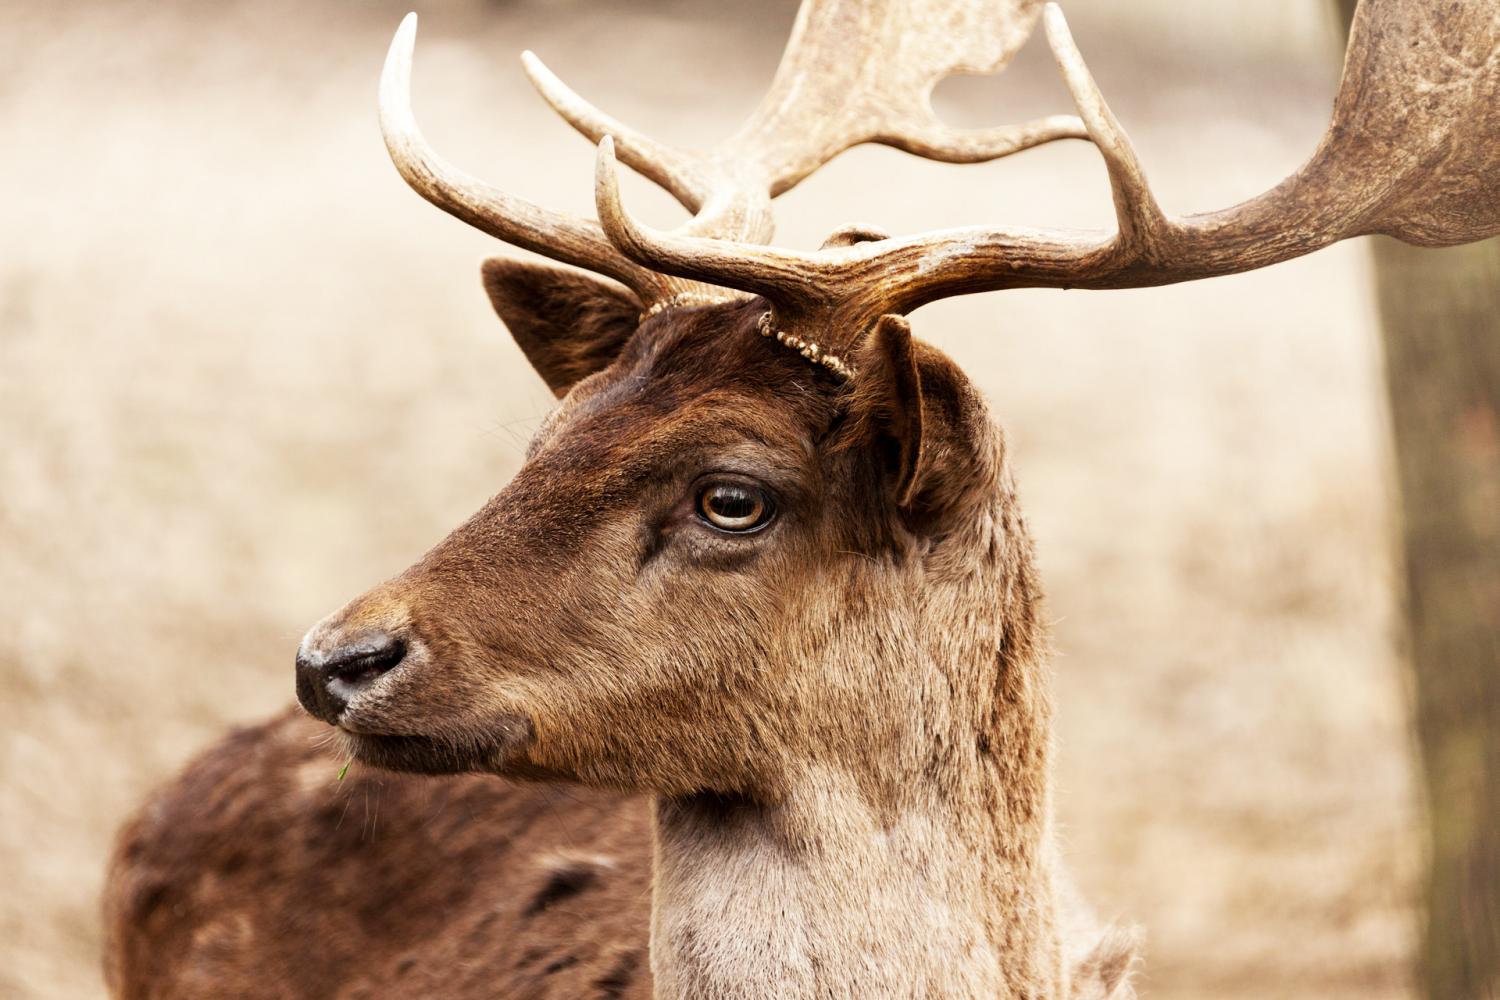 Harsh winter brings changes for hunters